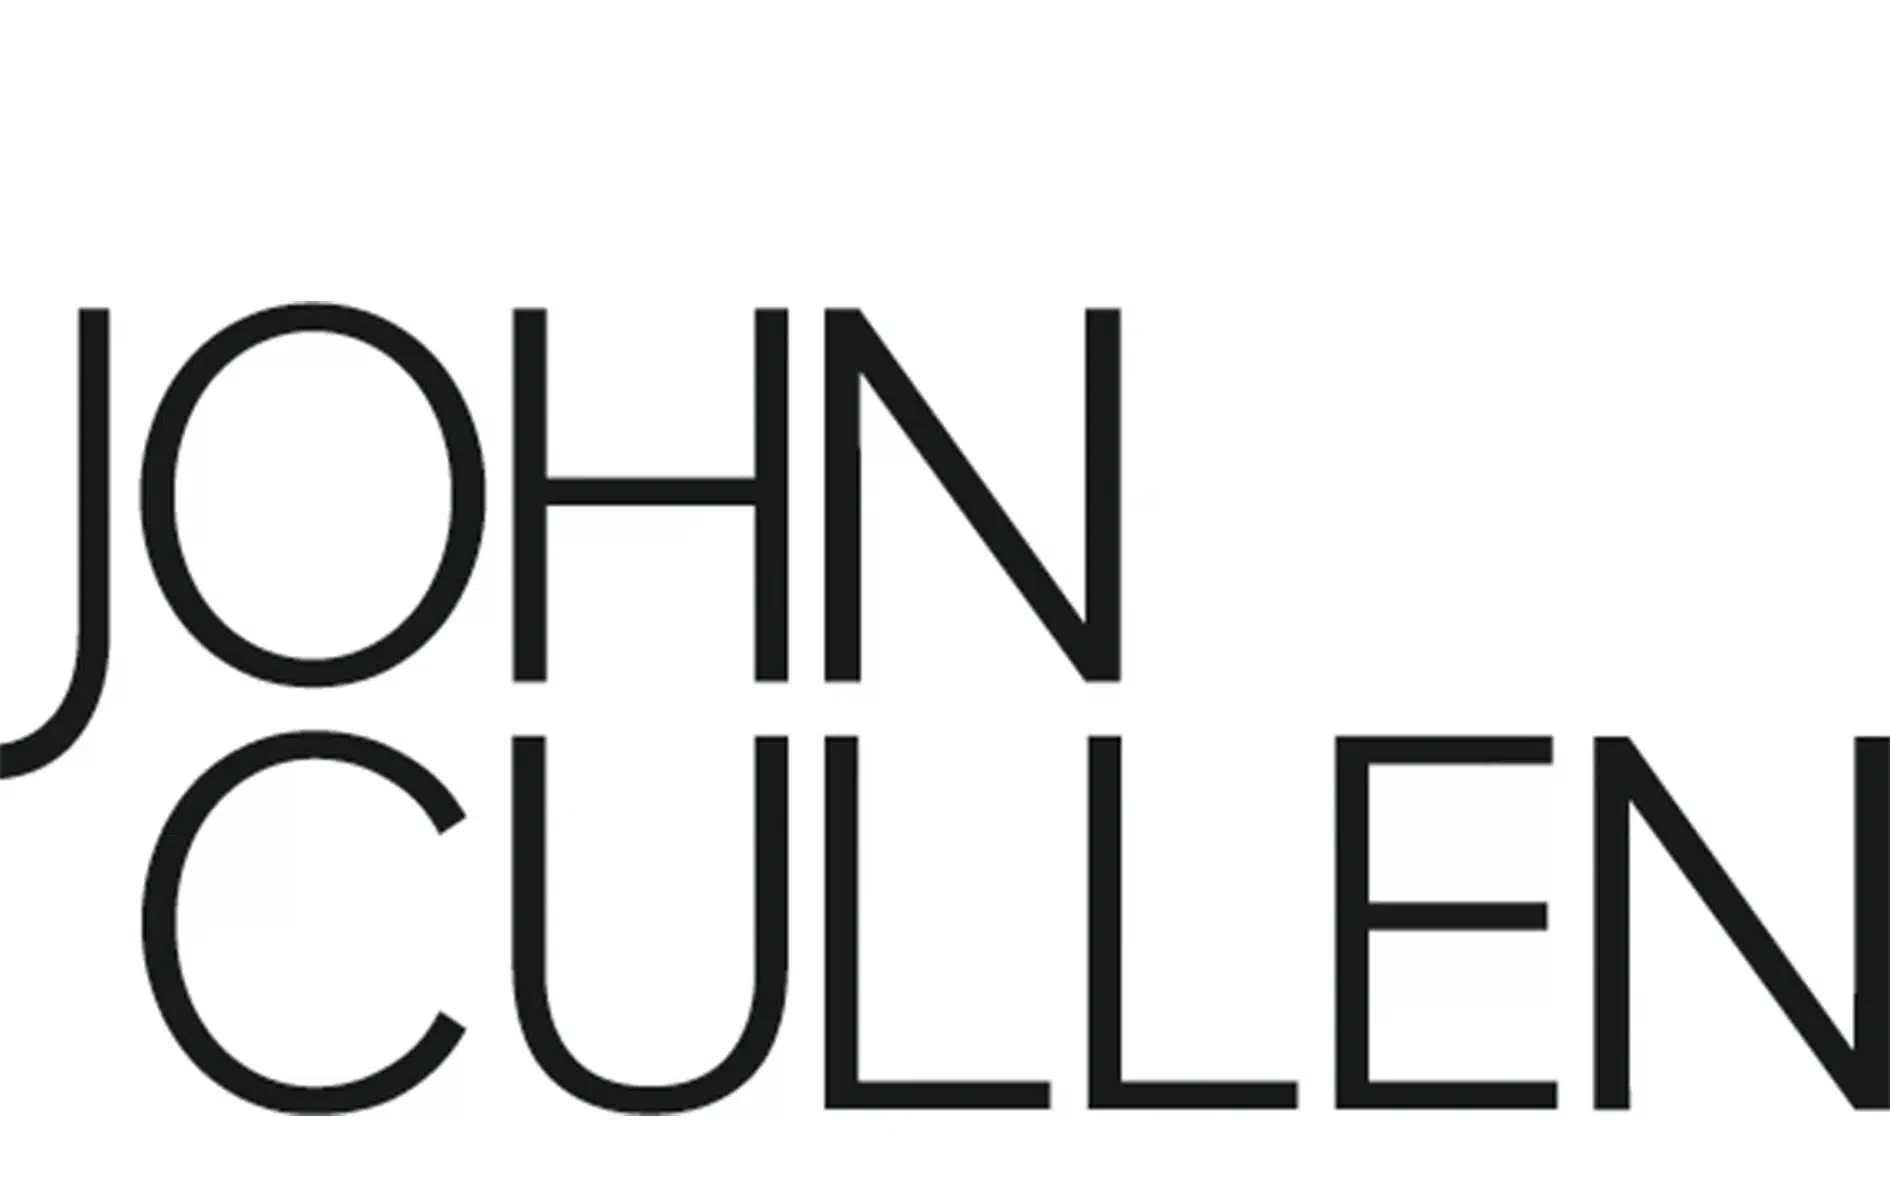 John Cullen Lighting are one of the premiere lighting companies in the london design community